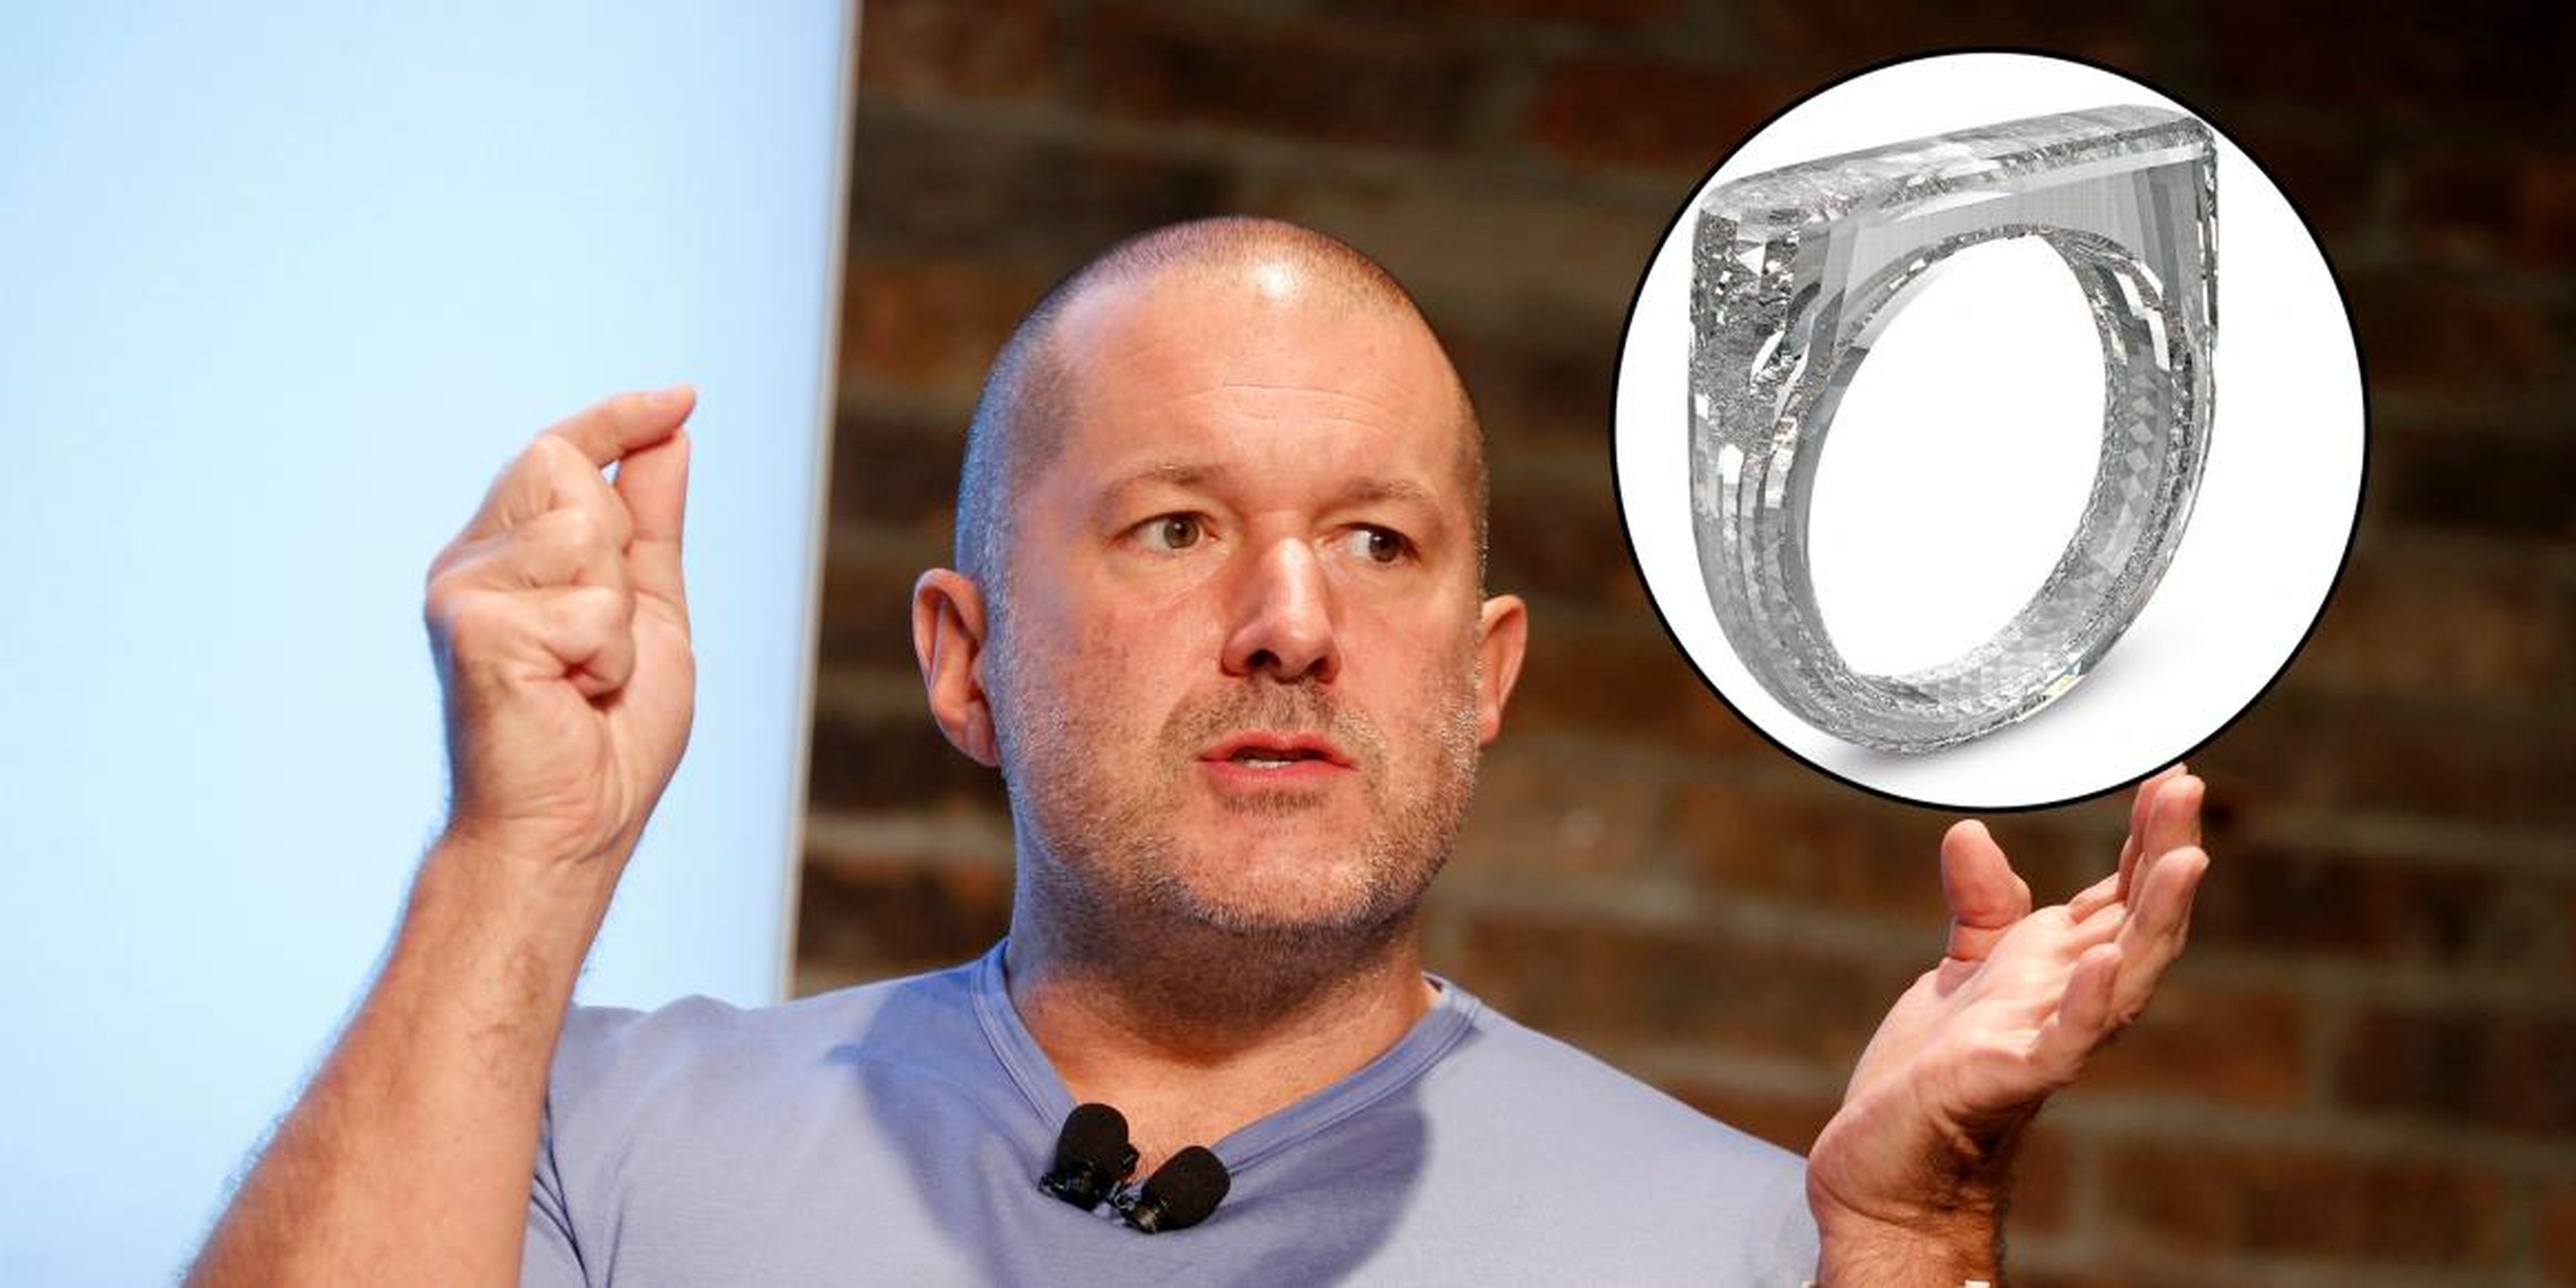 Apple's design guru Jony Ive designed a lot of unusual things you'd never expect to come from the person behind the iPhone — check them out